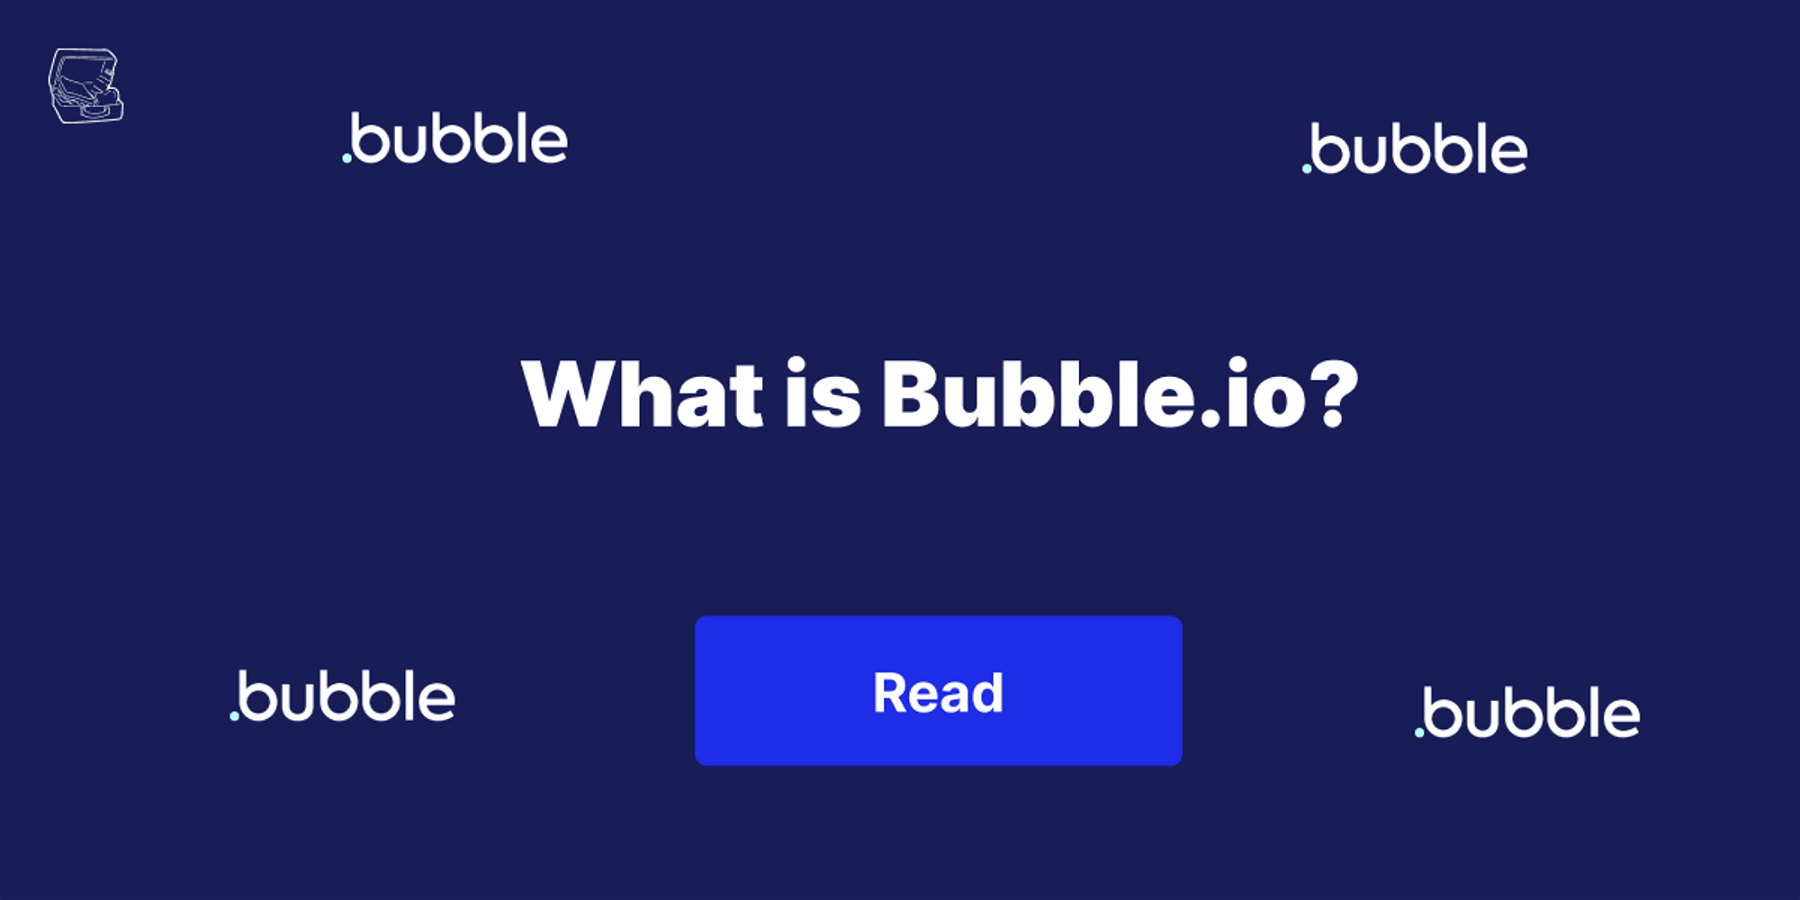 What is Bubble.io?